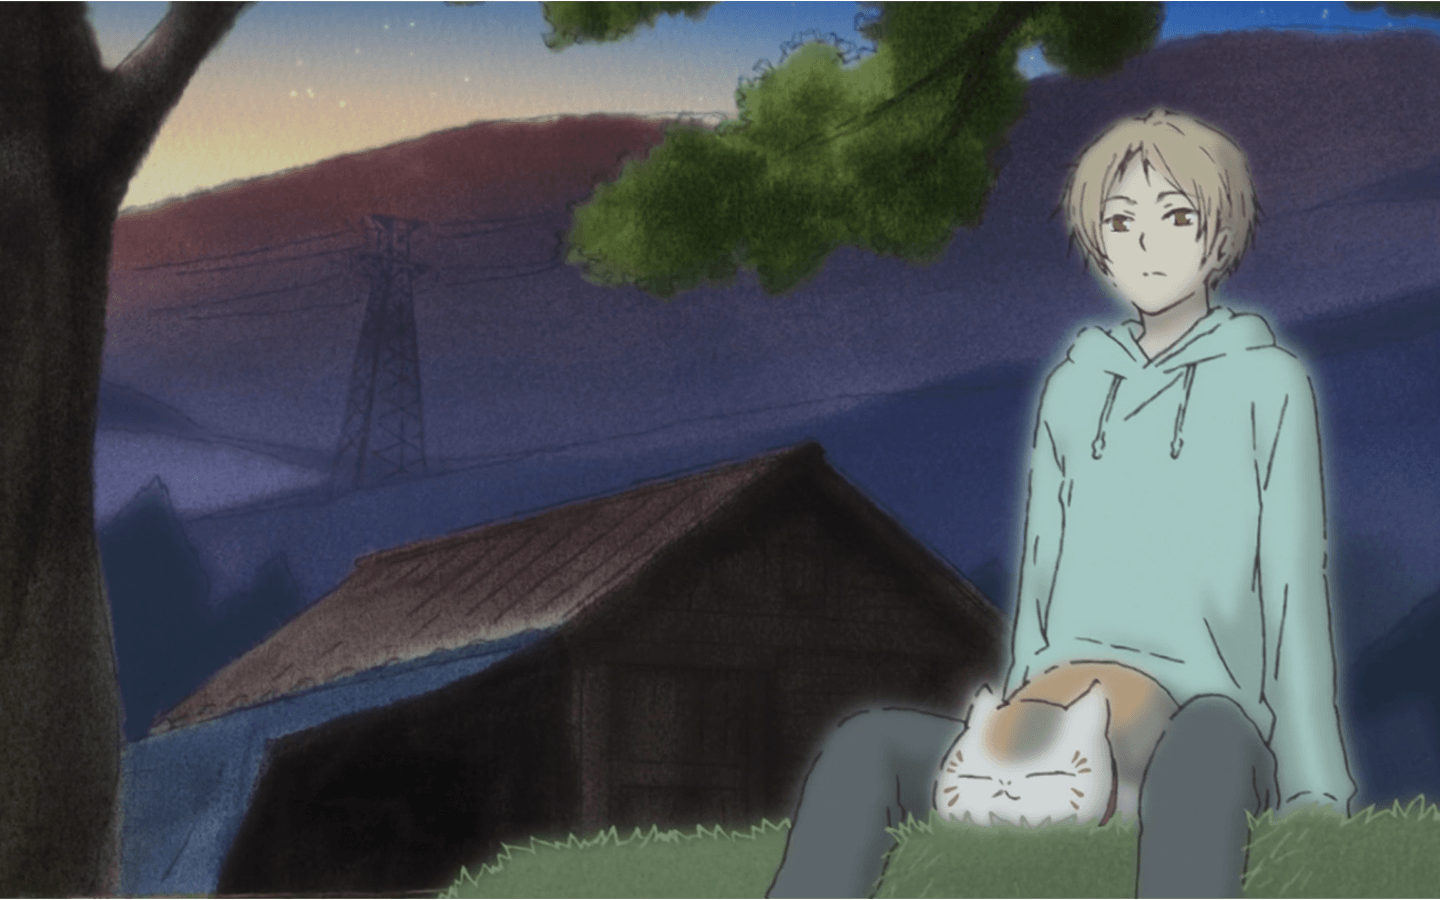 Thought I’d share some wallpapers I made from the Natsume Yuujinchou